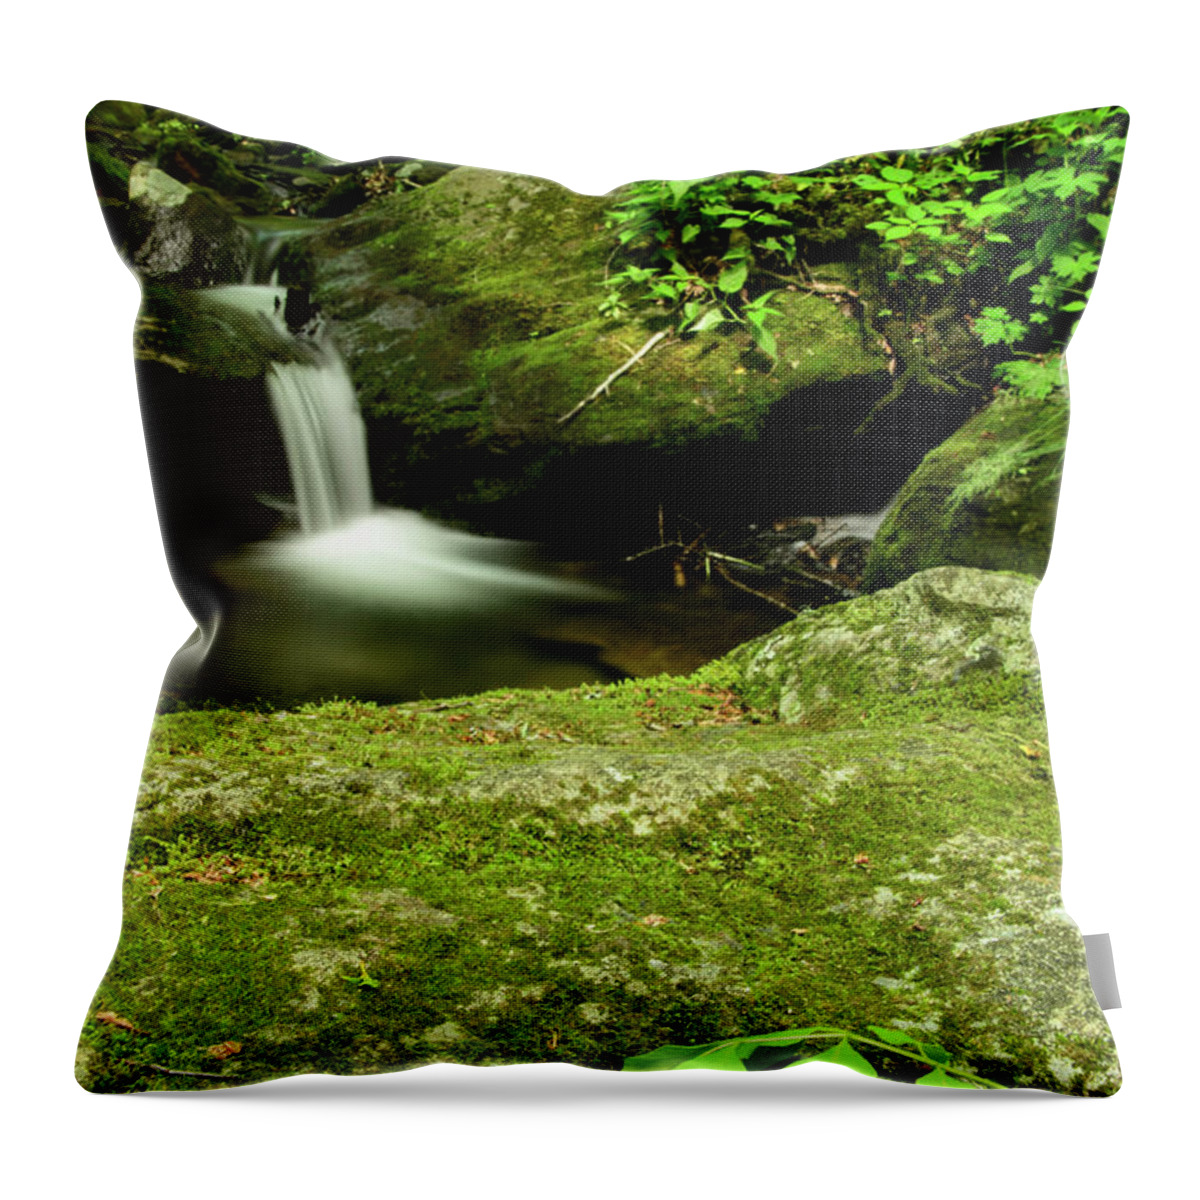 Blue Ridge Mountains Throw Pillow featuring the photograph Little Waterfall by Melissa Southern